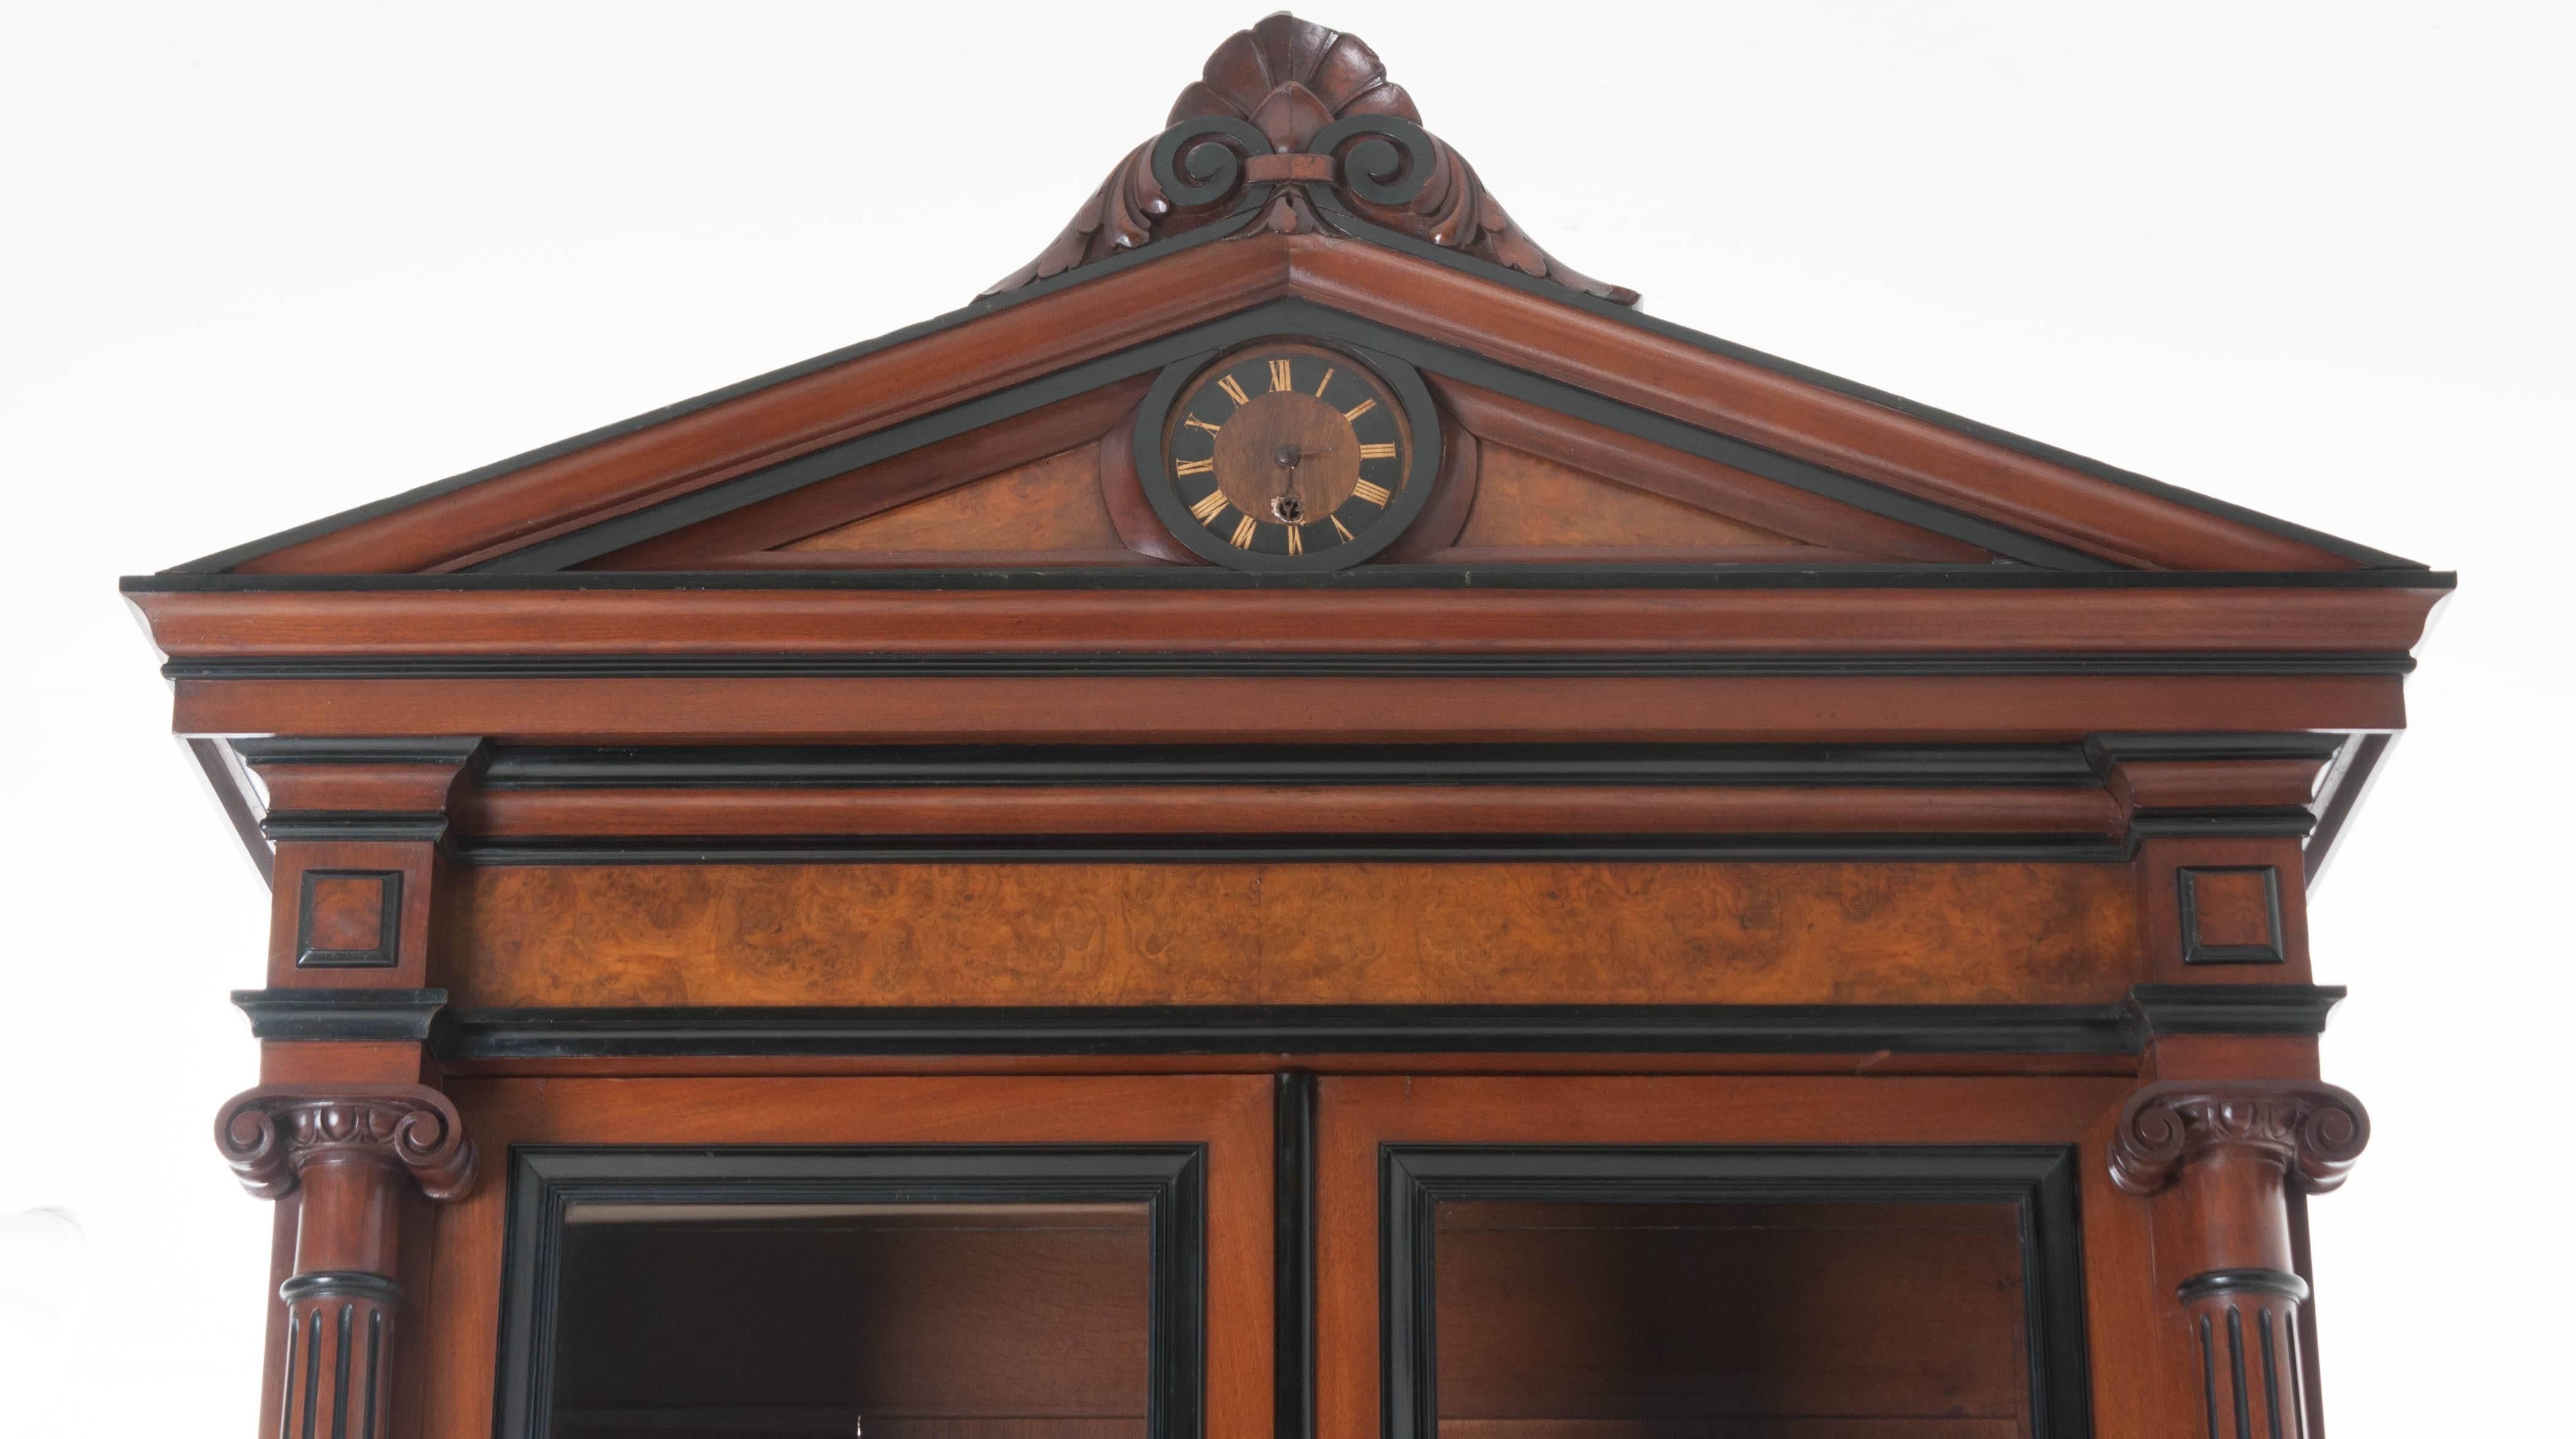 An outstanding French Napoleon III mahogany buffet à deux corps featuring wonderfully detailed carvings from the mid-late 19th century. Exceptional ebony trim and details complement the burl mahogany and give straight lines to this otherwise figured